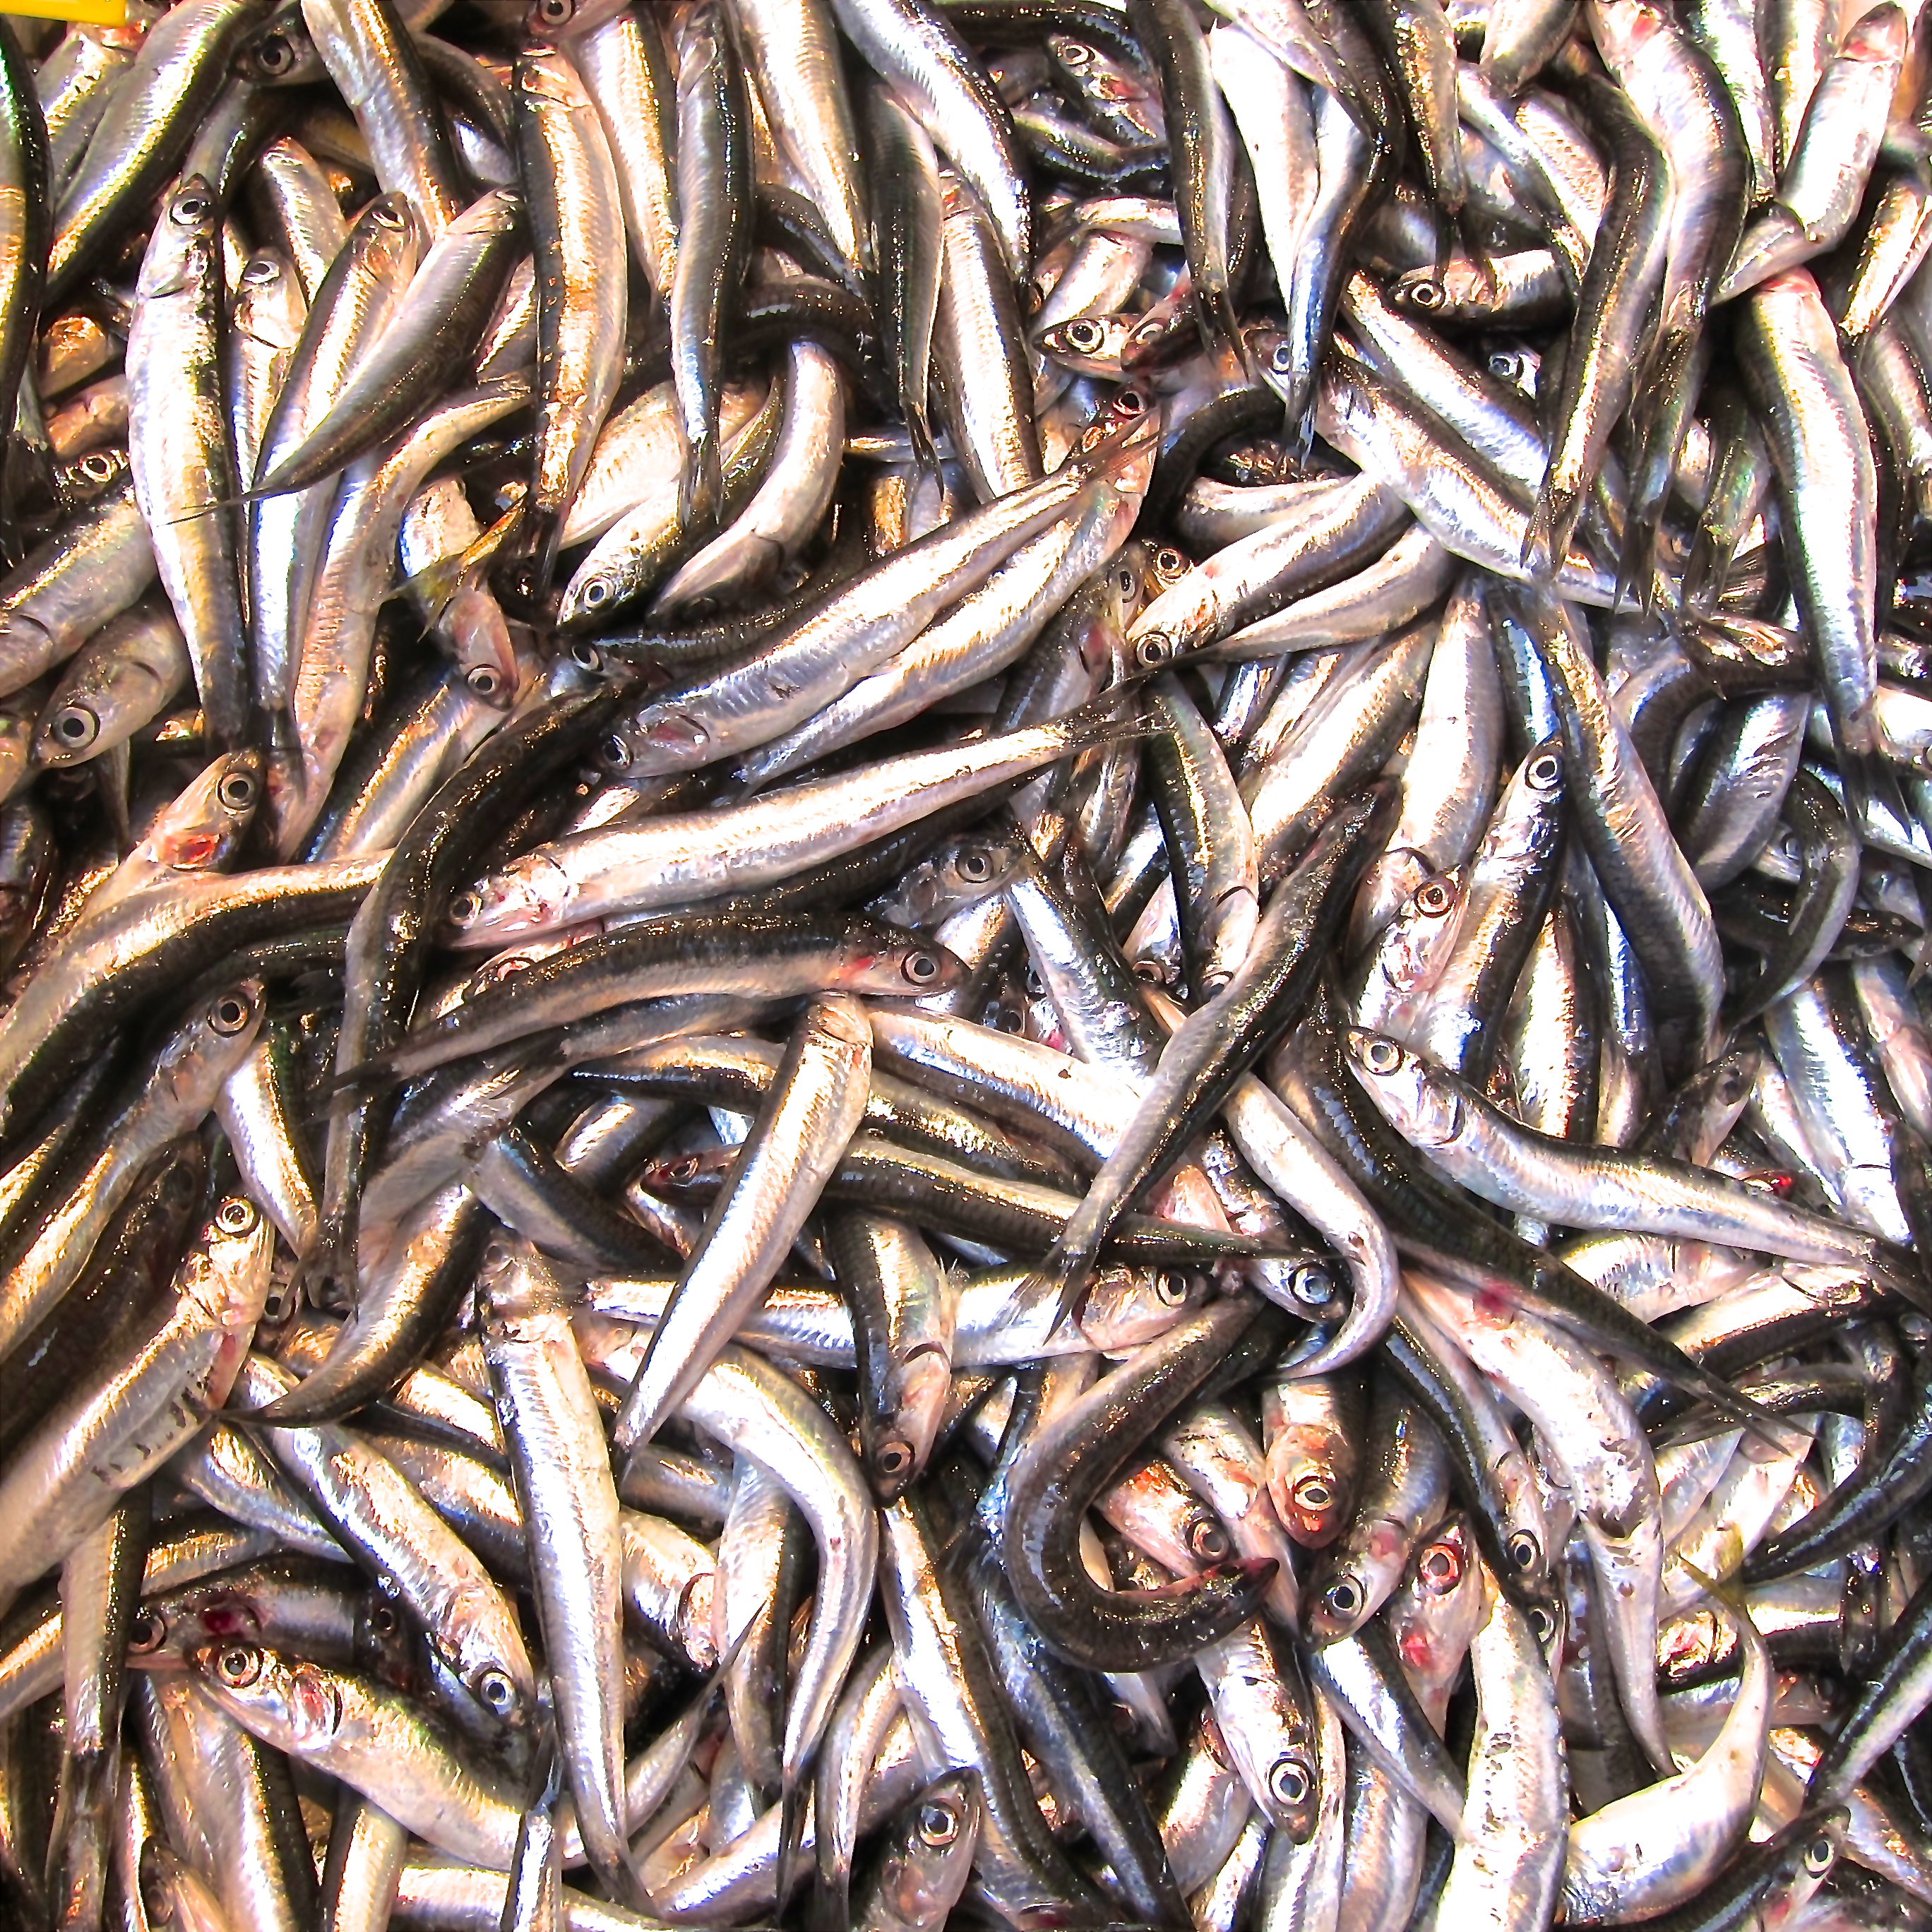 Anchovies, Istanbul